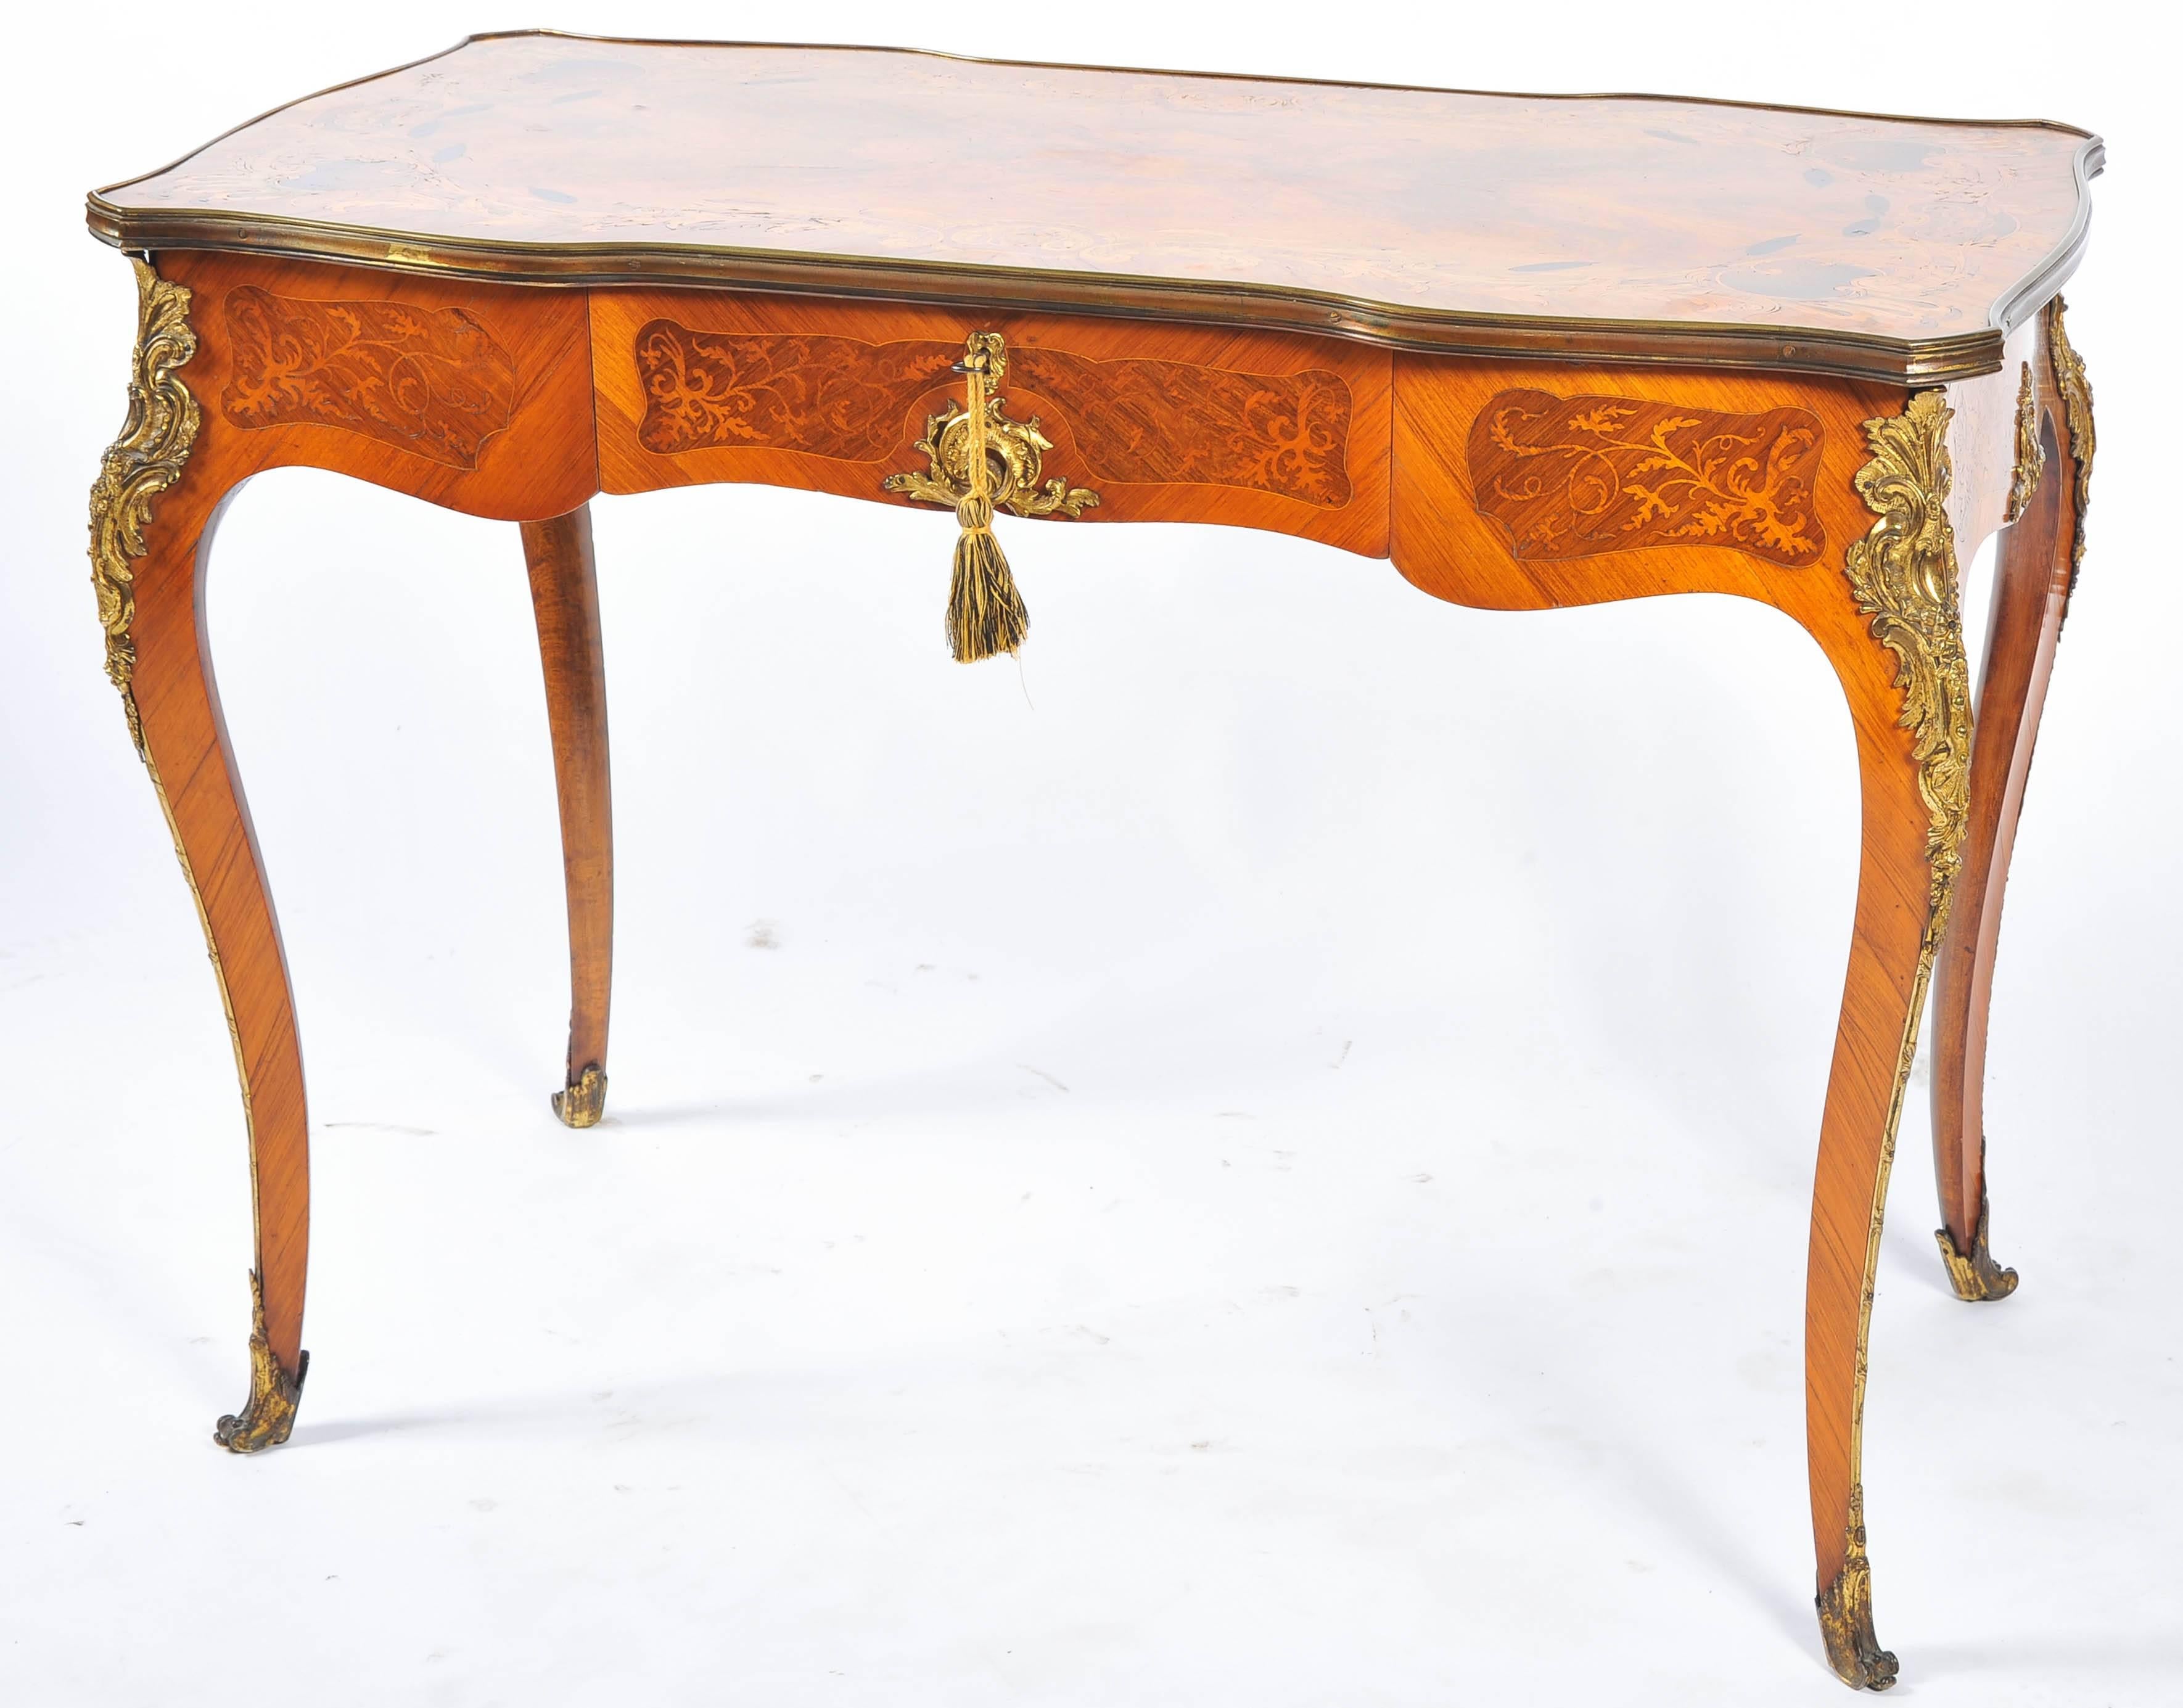 A very good quality French marquetry side table, having inlaid swag and foliate decoration, a single frieze drawer. Ormolu mounts and raised on cabriole legs.